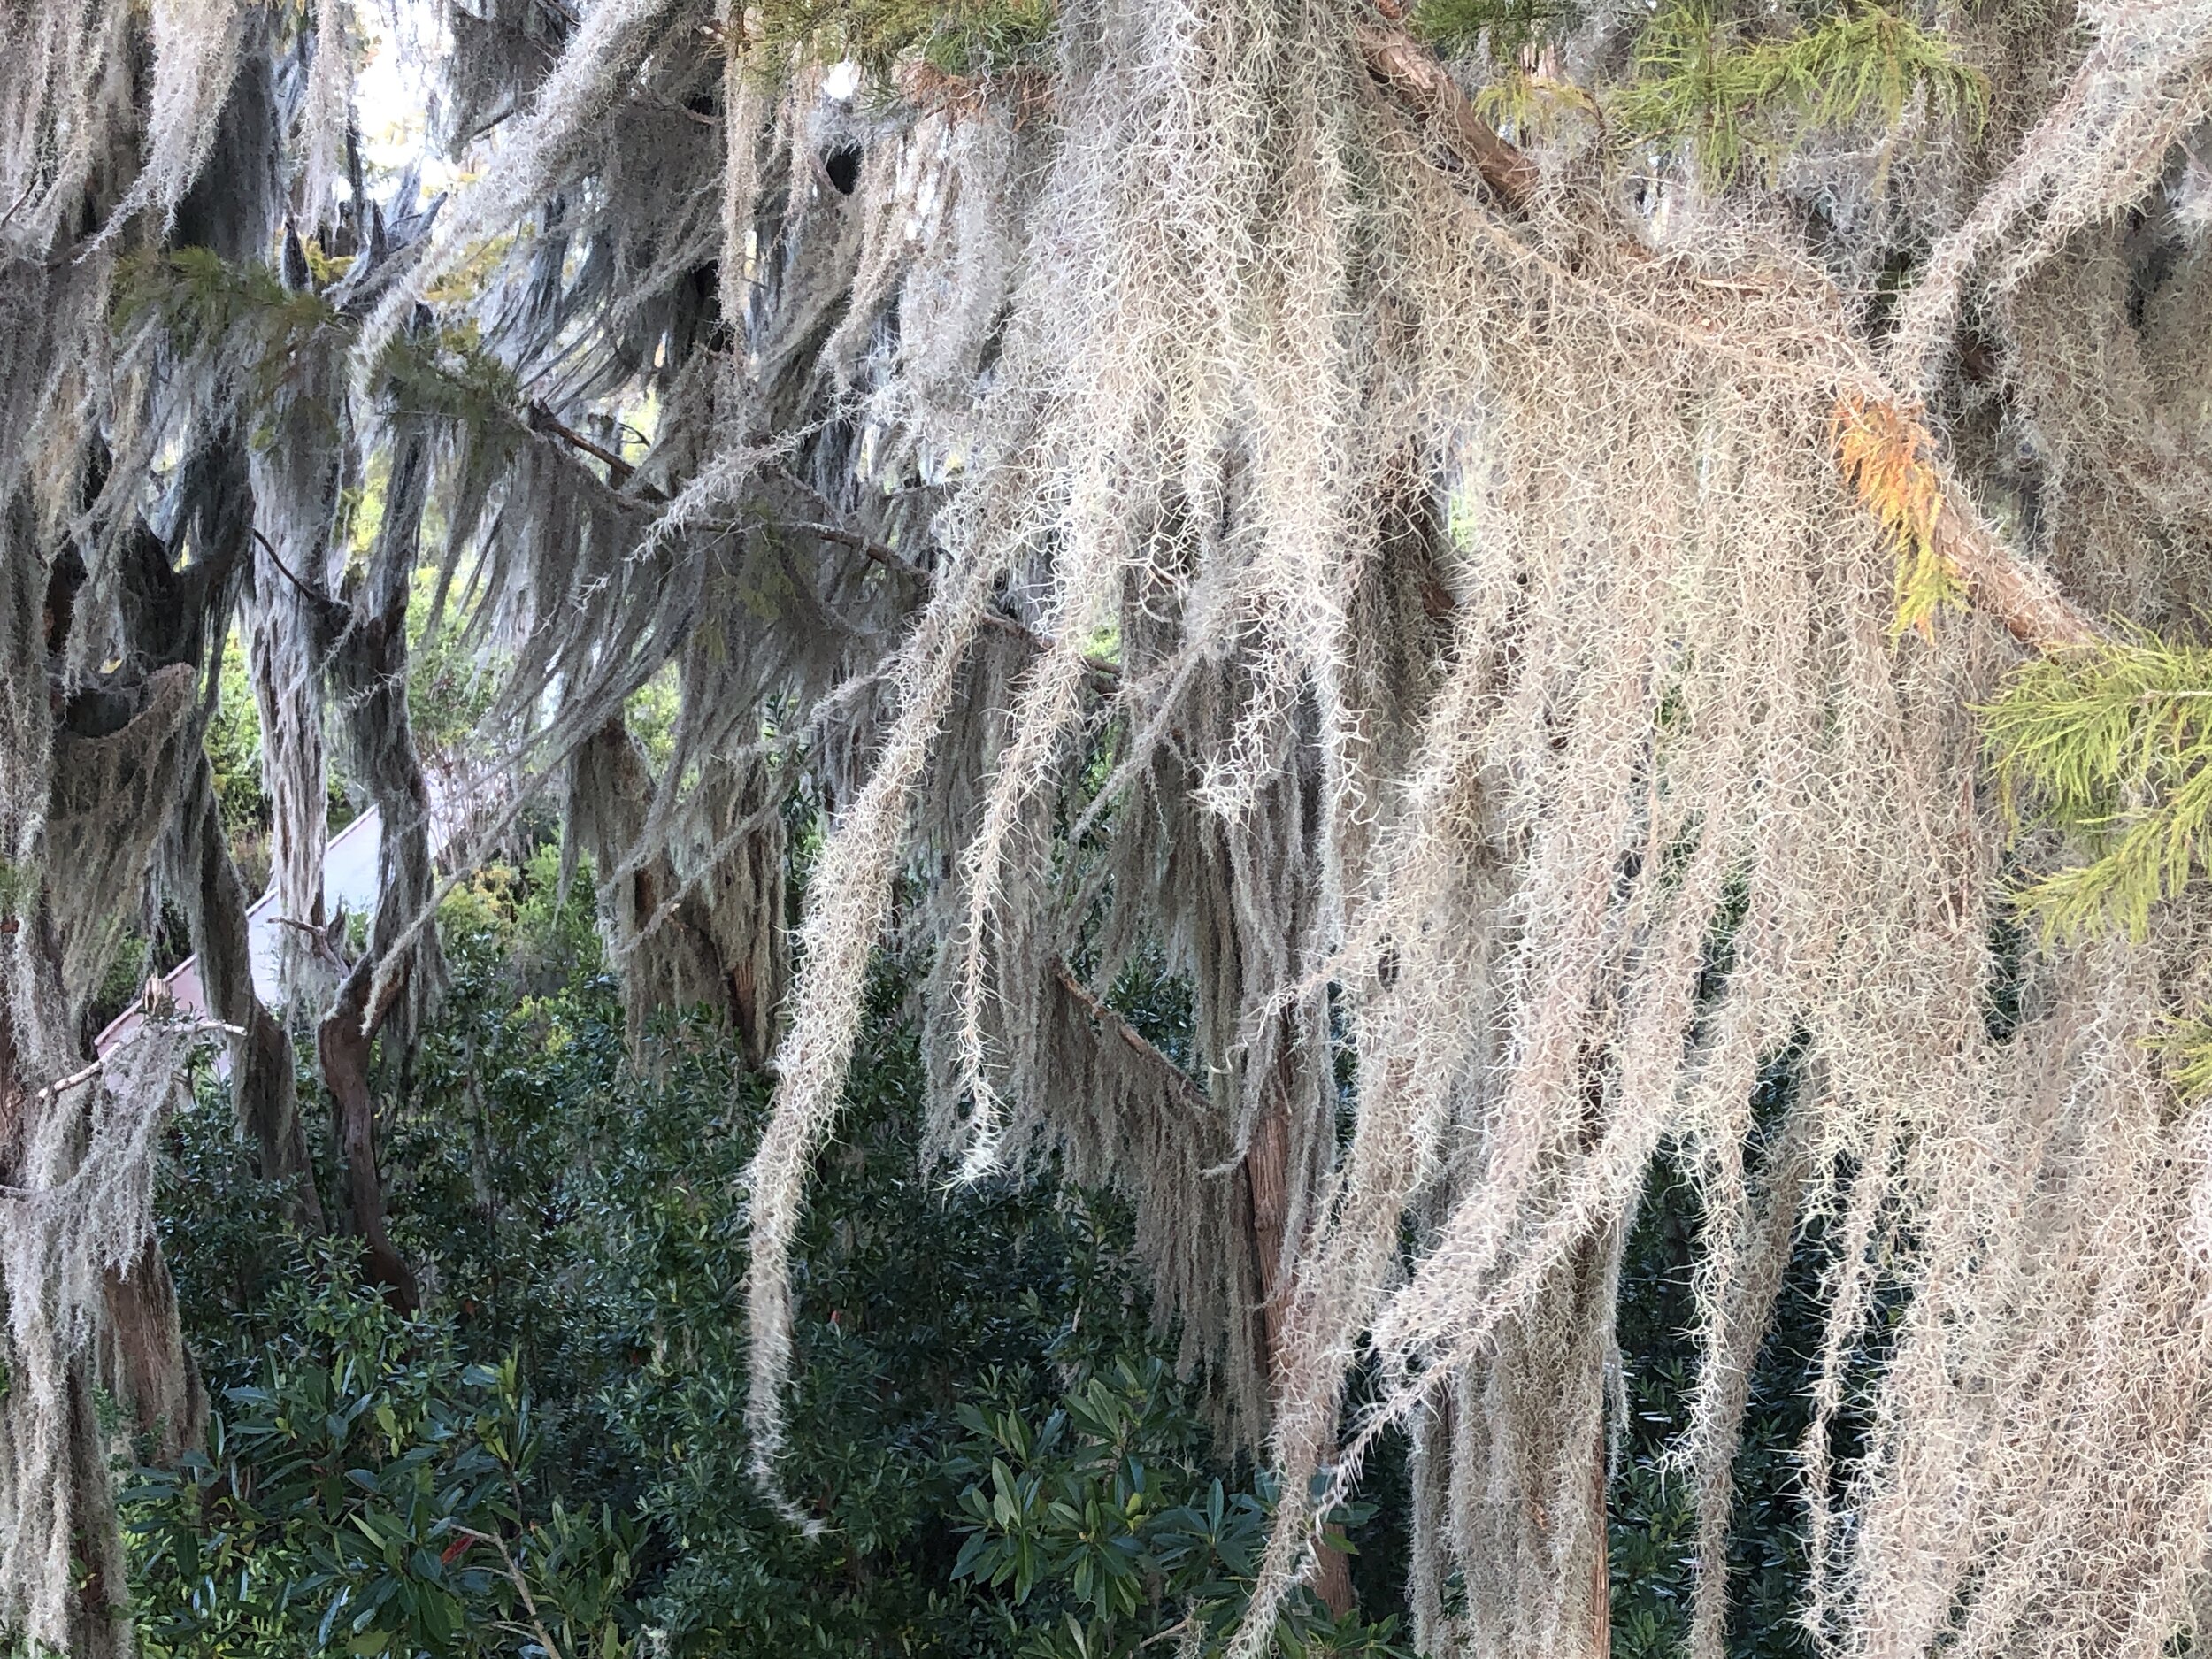 Spanish Moss, an airplant